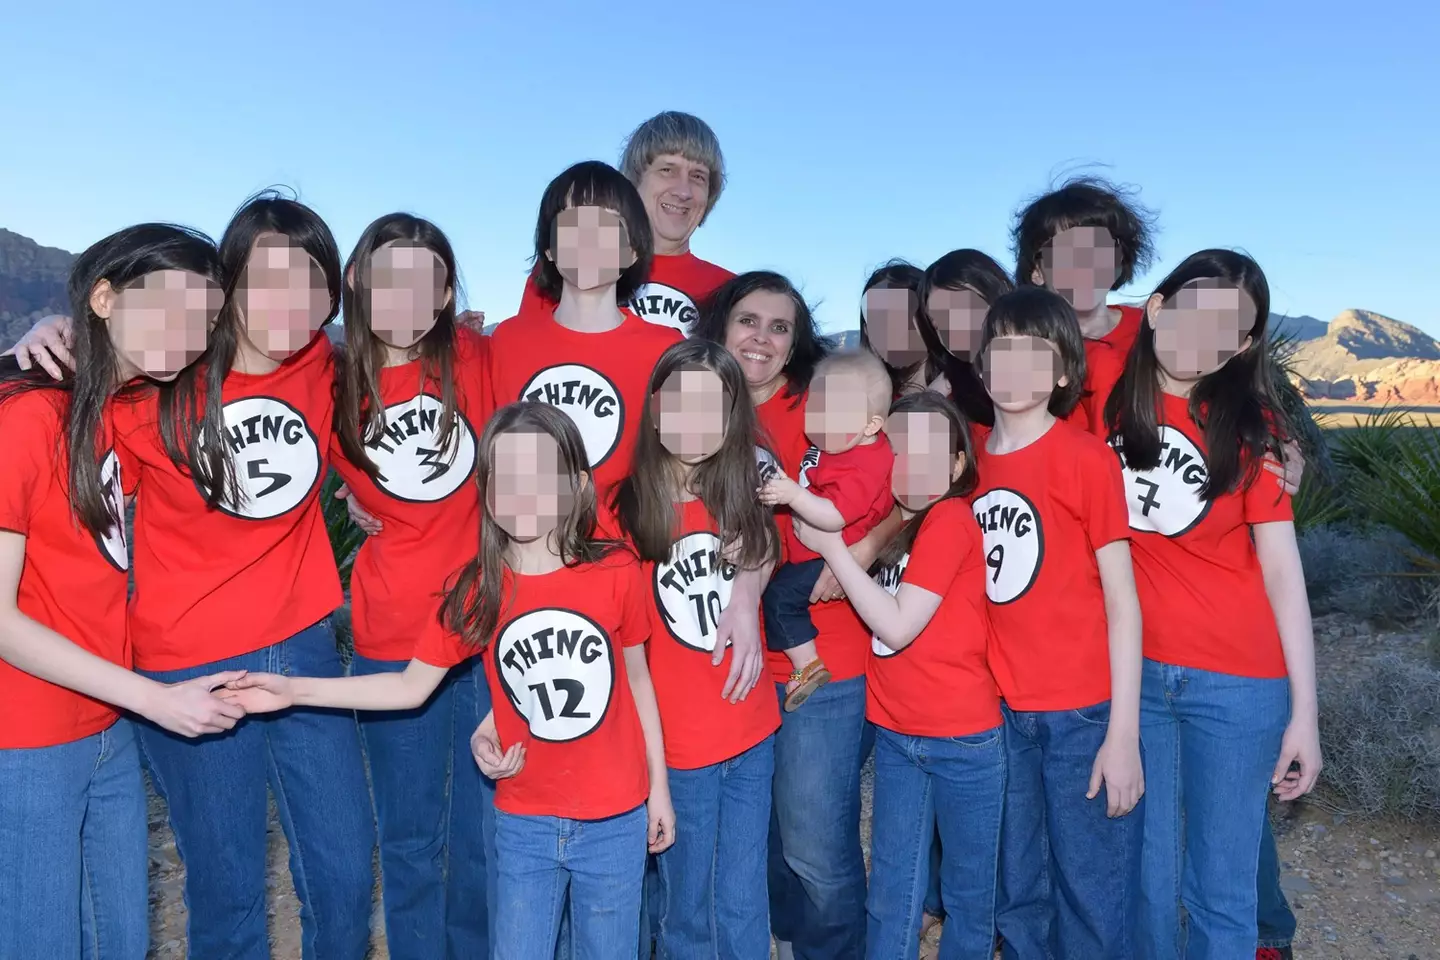 David and Louise Turpin with their 13 children.